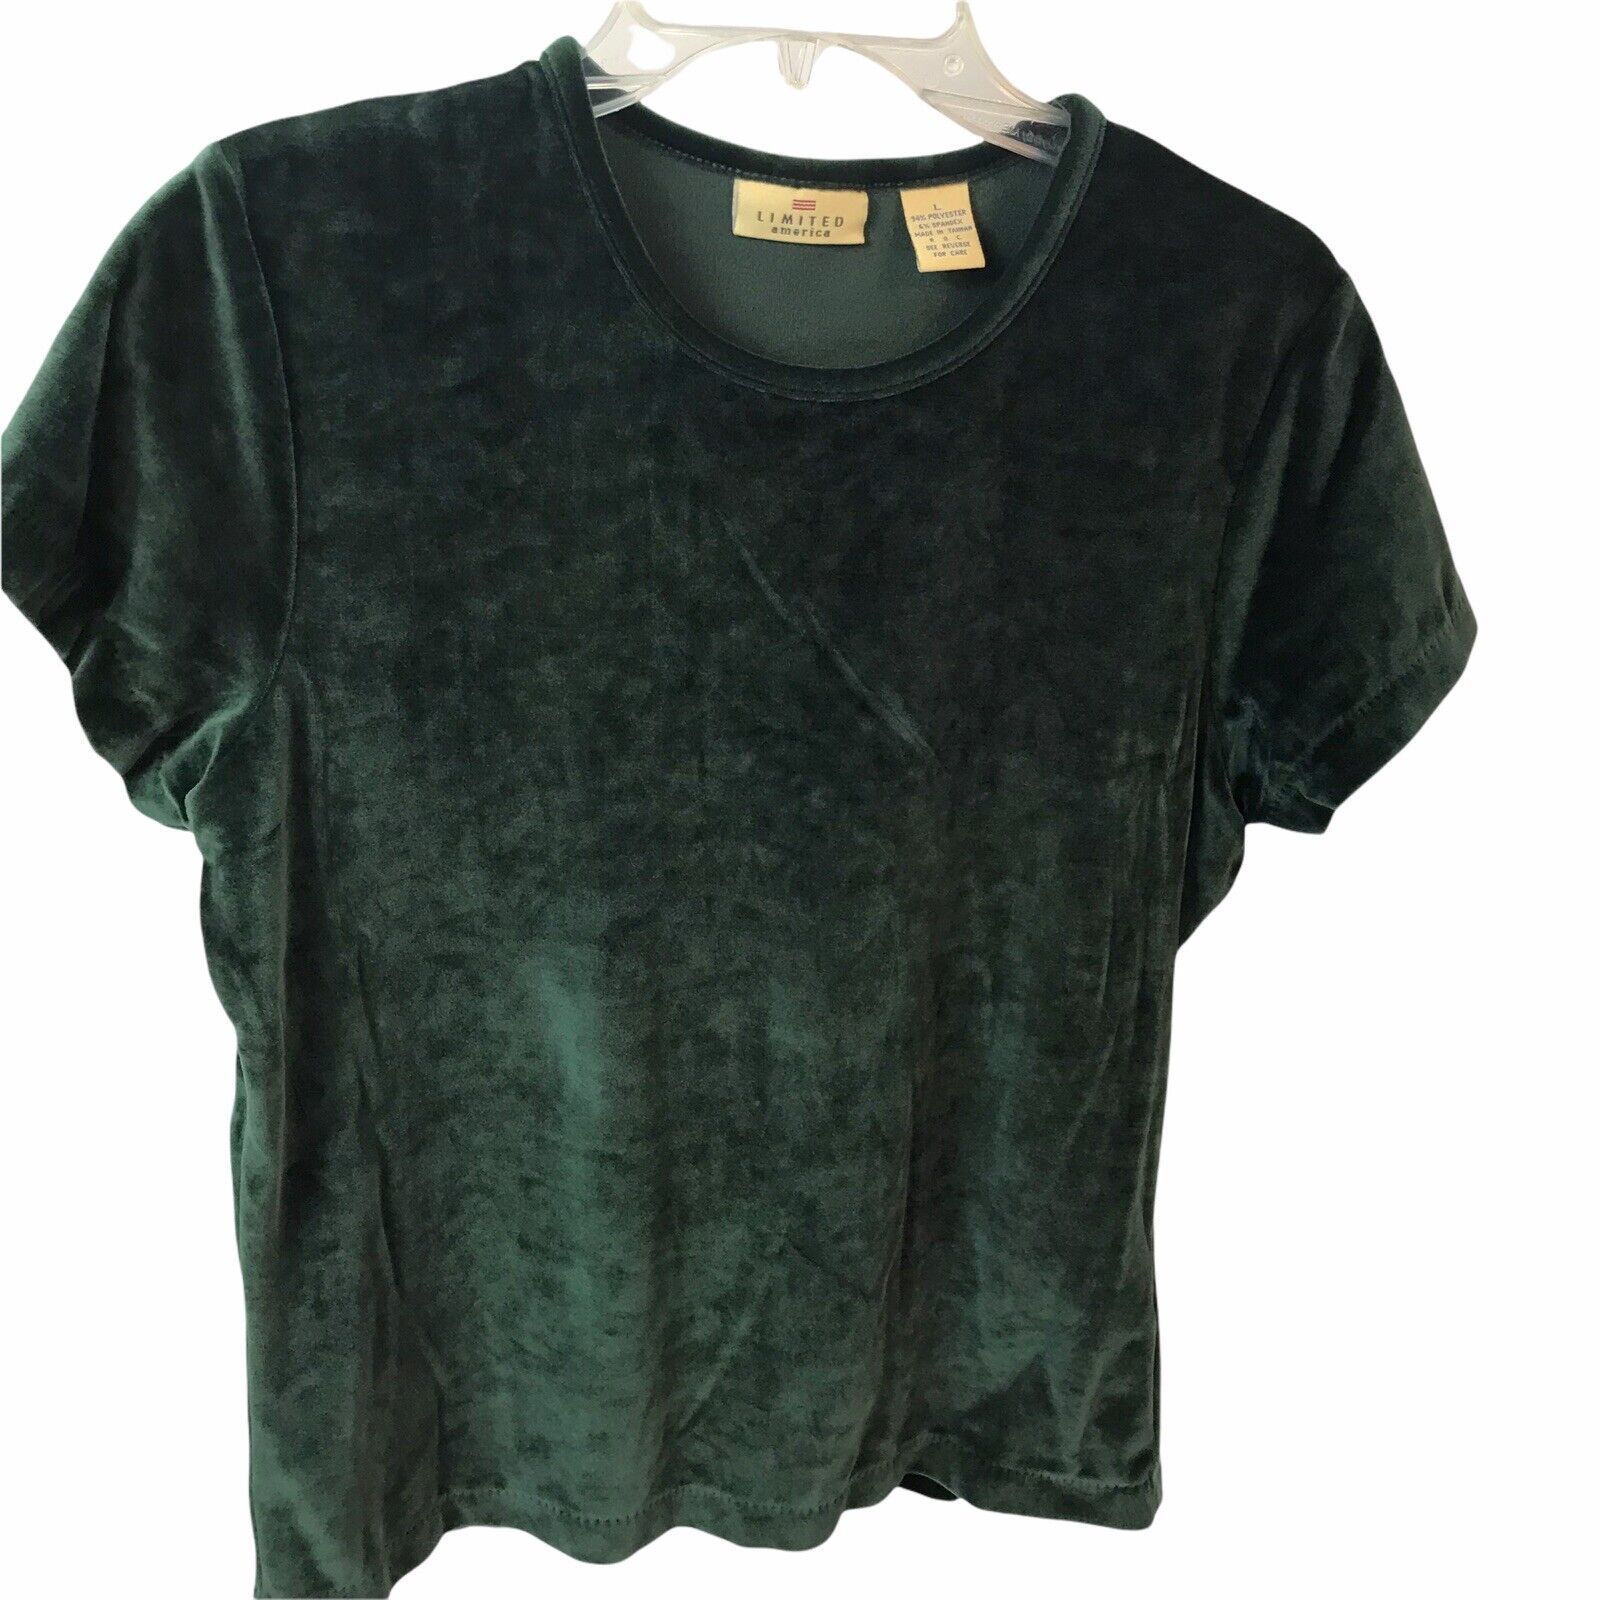 Primary image for Vintage Top Limited America Velveteen Blouse Green Holiday Sz L retro